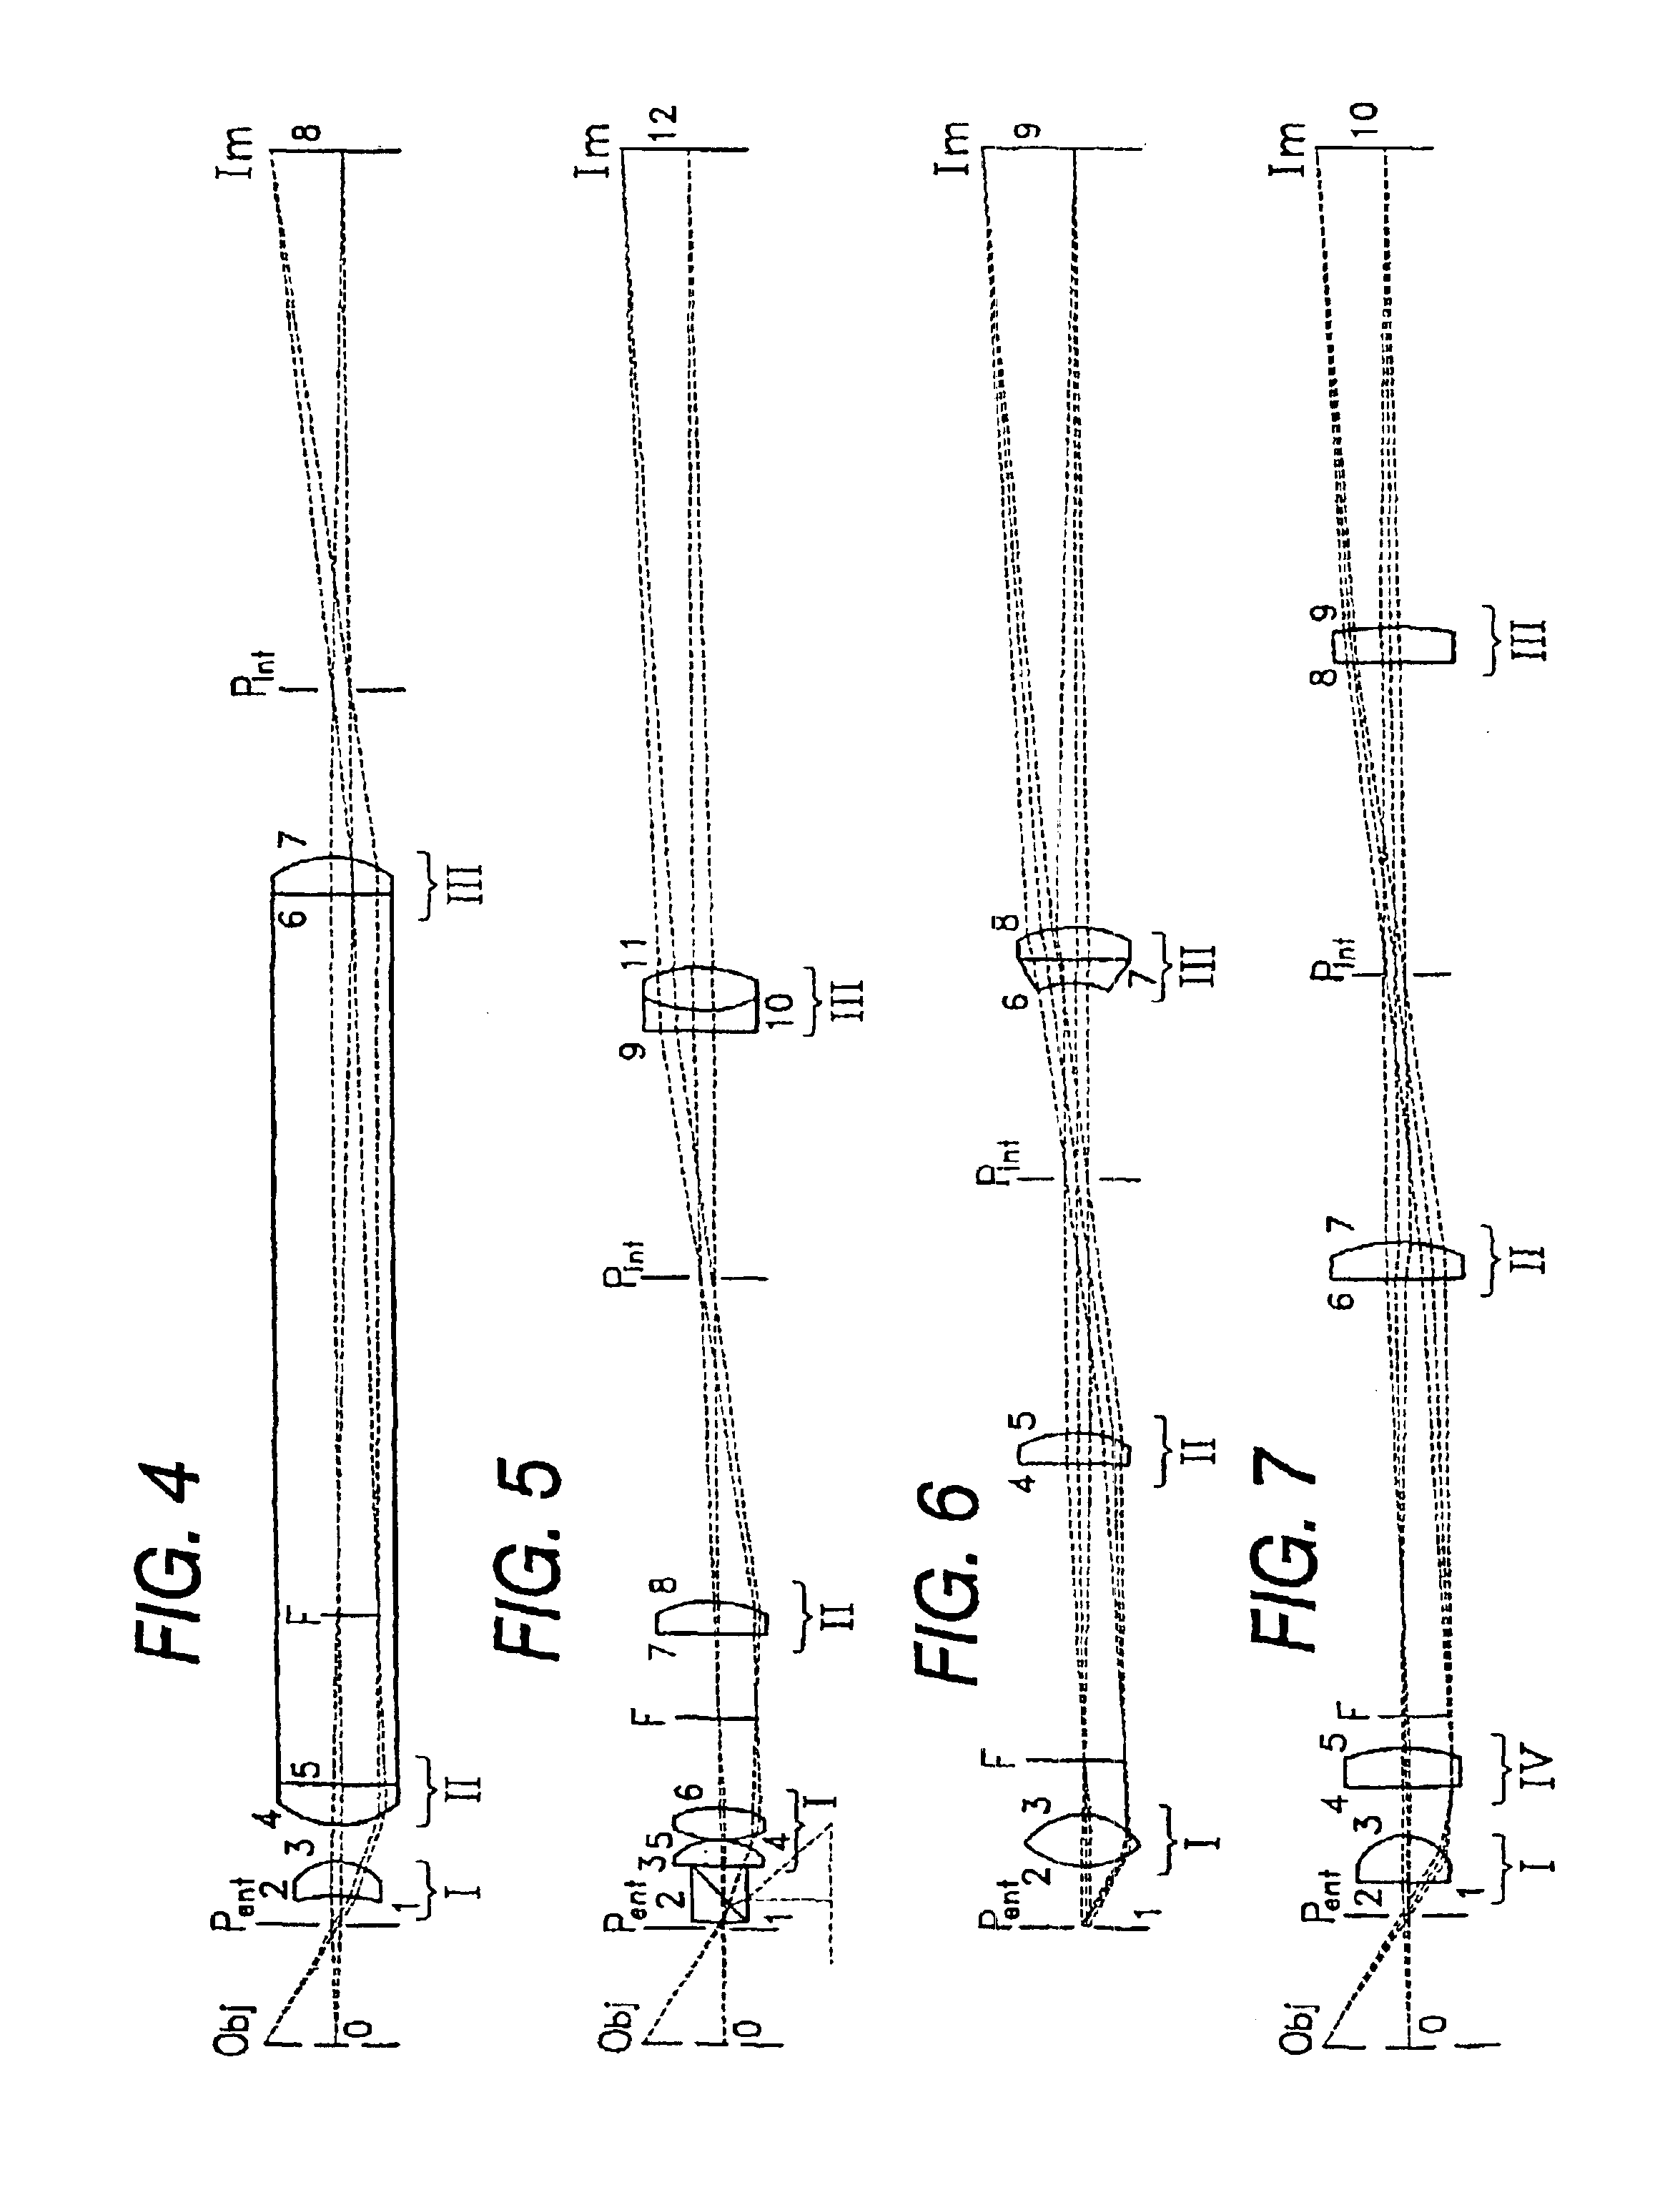 Integrated optical system for endoscopes and the like